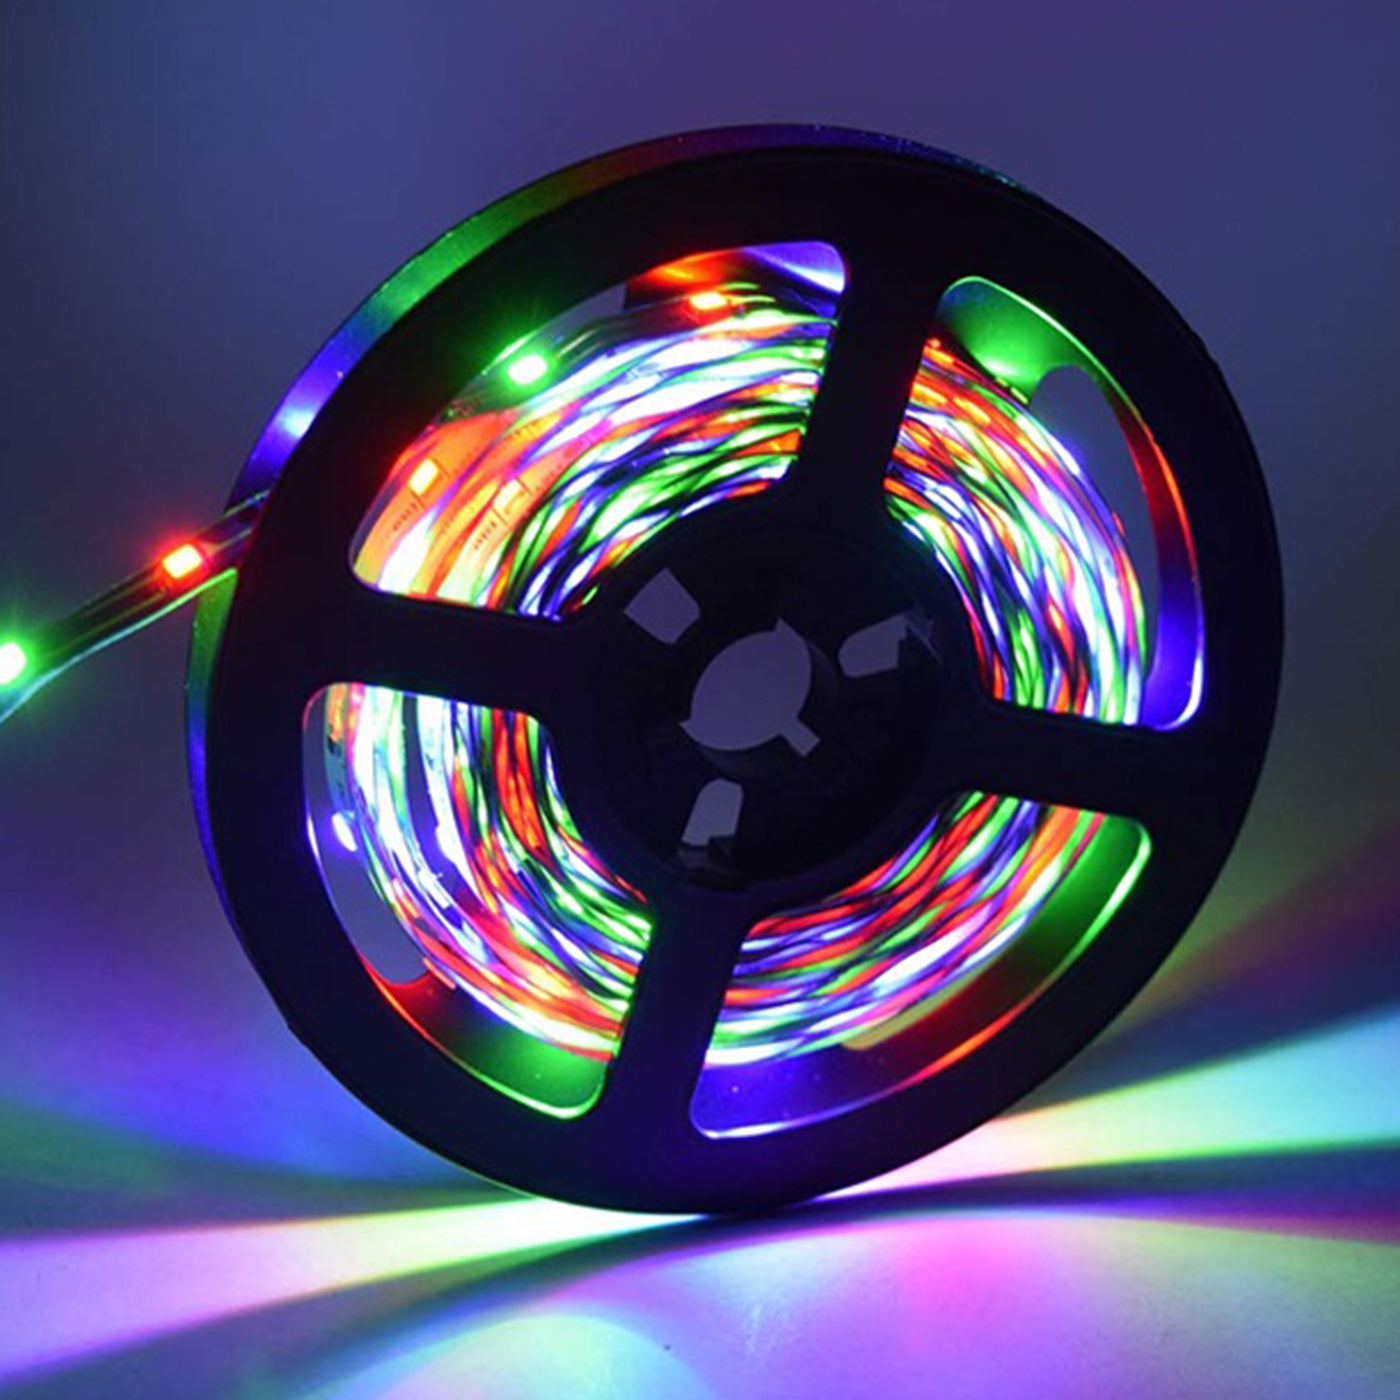 DecorTwist LEDs 5 m Strip Light (Pack of 1) | Indoor & Outdoor Decorative | 120 LED/Mtr with Adaptor (Multi)